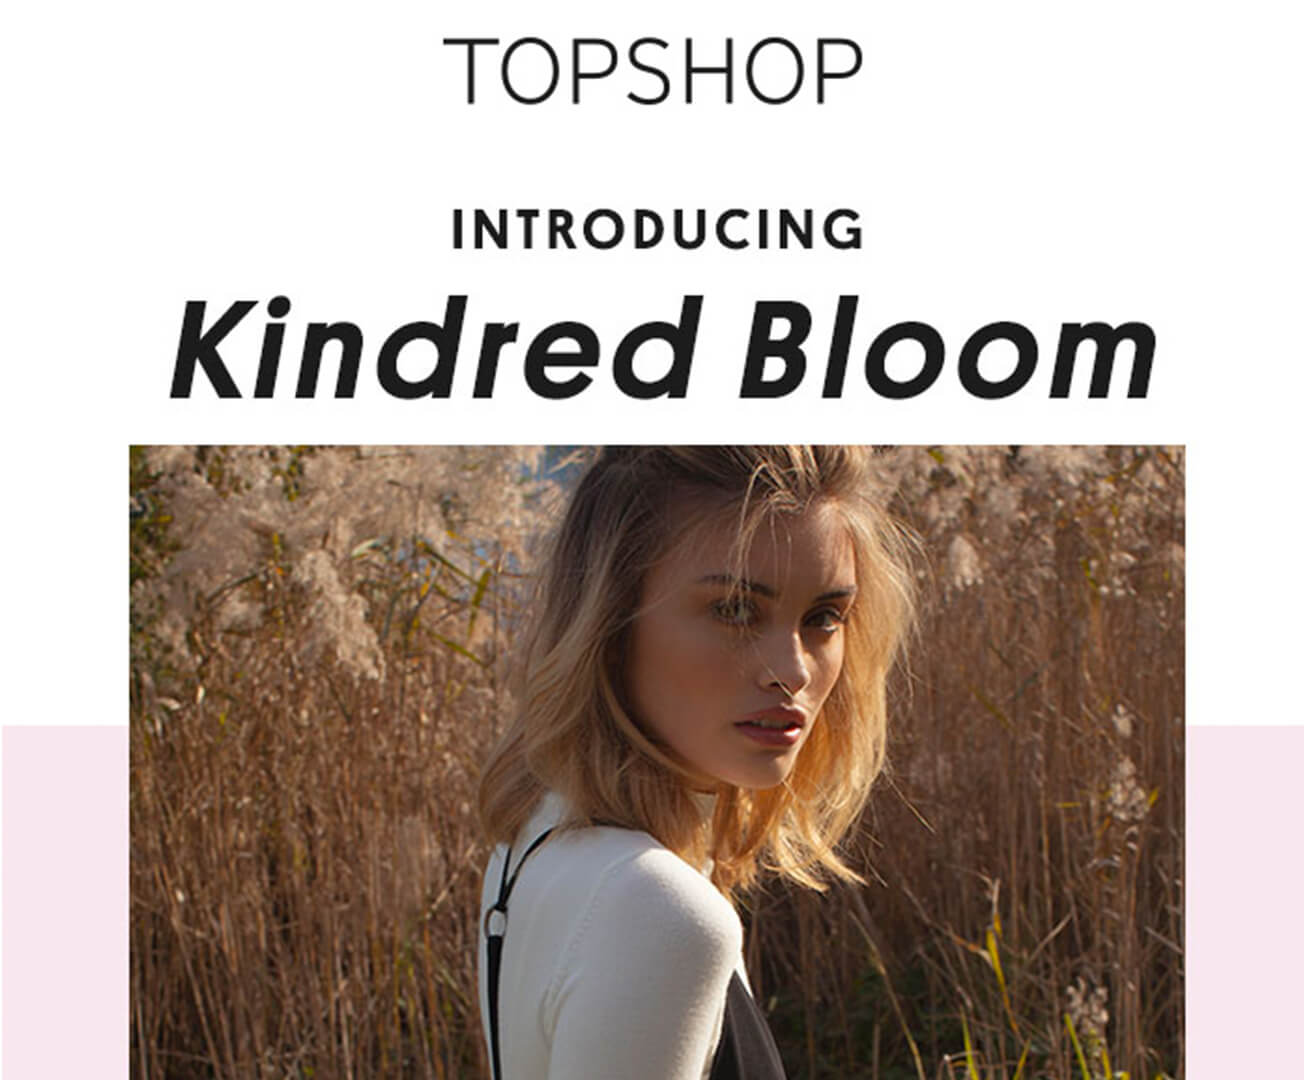 Top Shop - Email Marketing Campaign Example